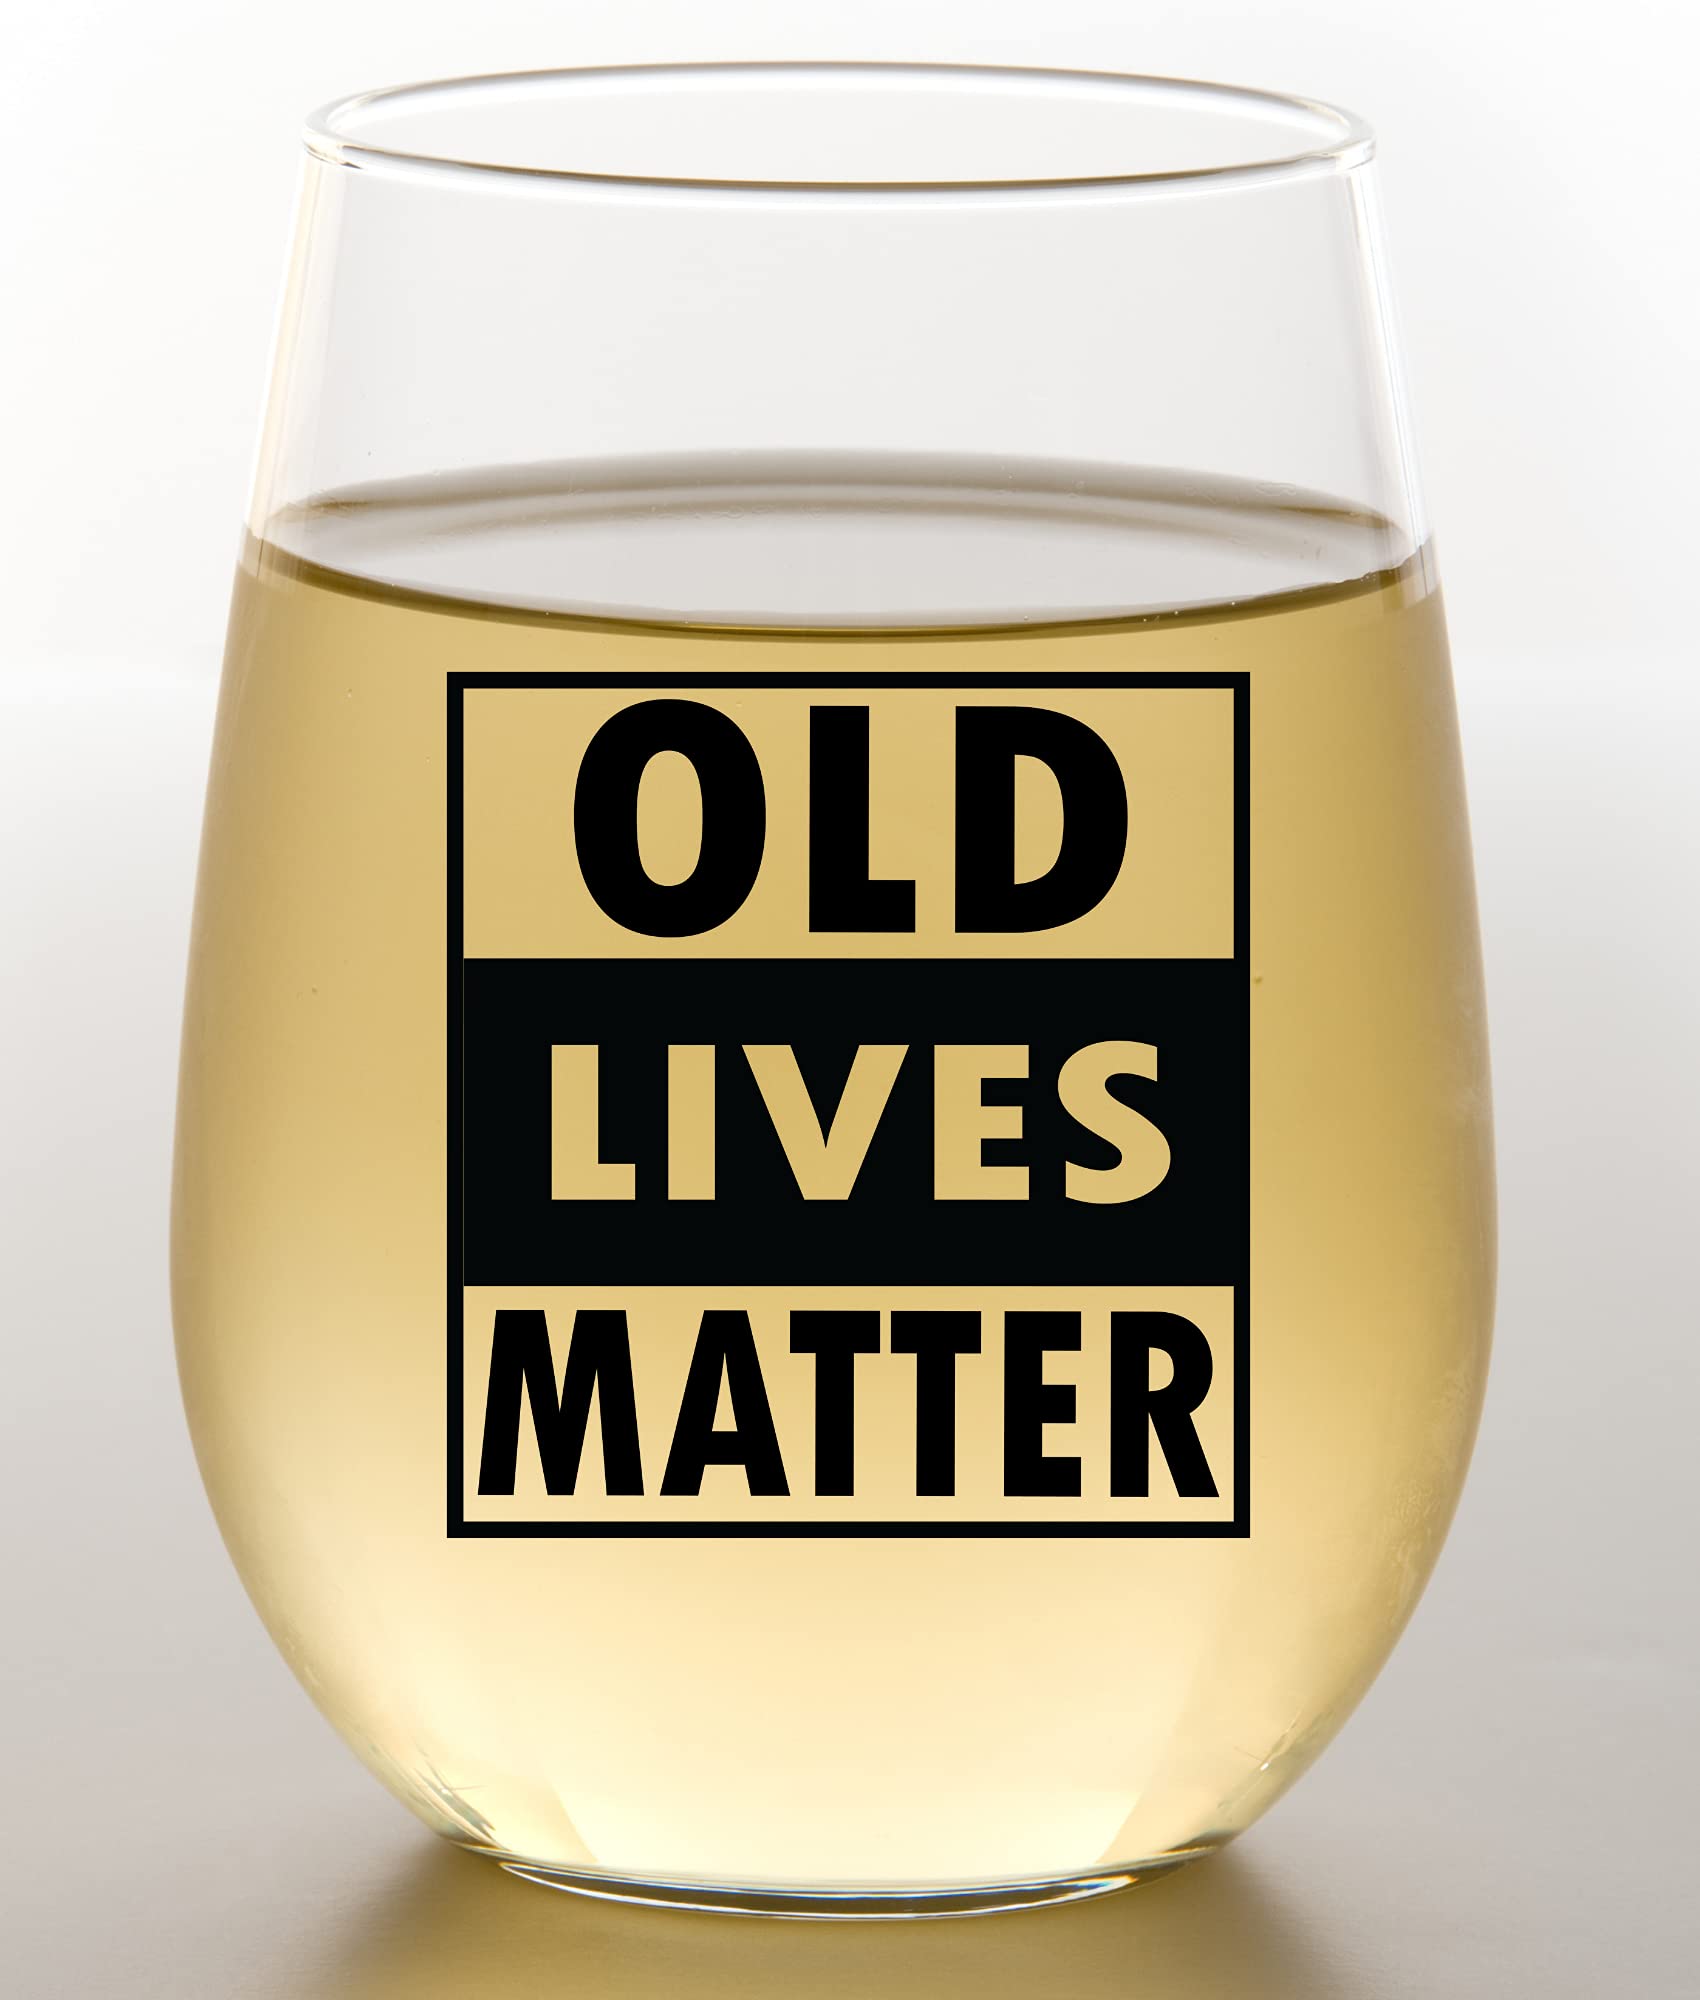 COOL AF Old Lives Matter Wine and Whiskey Glass Gift Set For Men and Women - His and Hers Gift for Anniversary, Birthday, Retirement - Great Gift for Married Couples Grandma and Grandpa, Dad and Mom